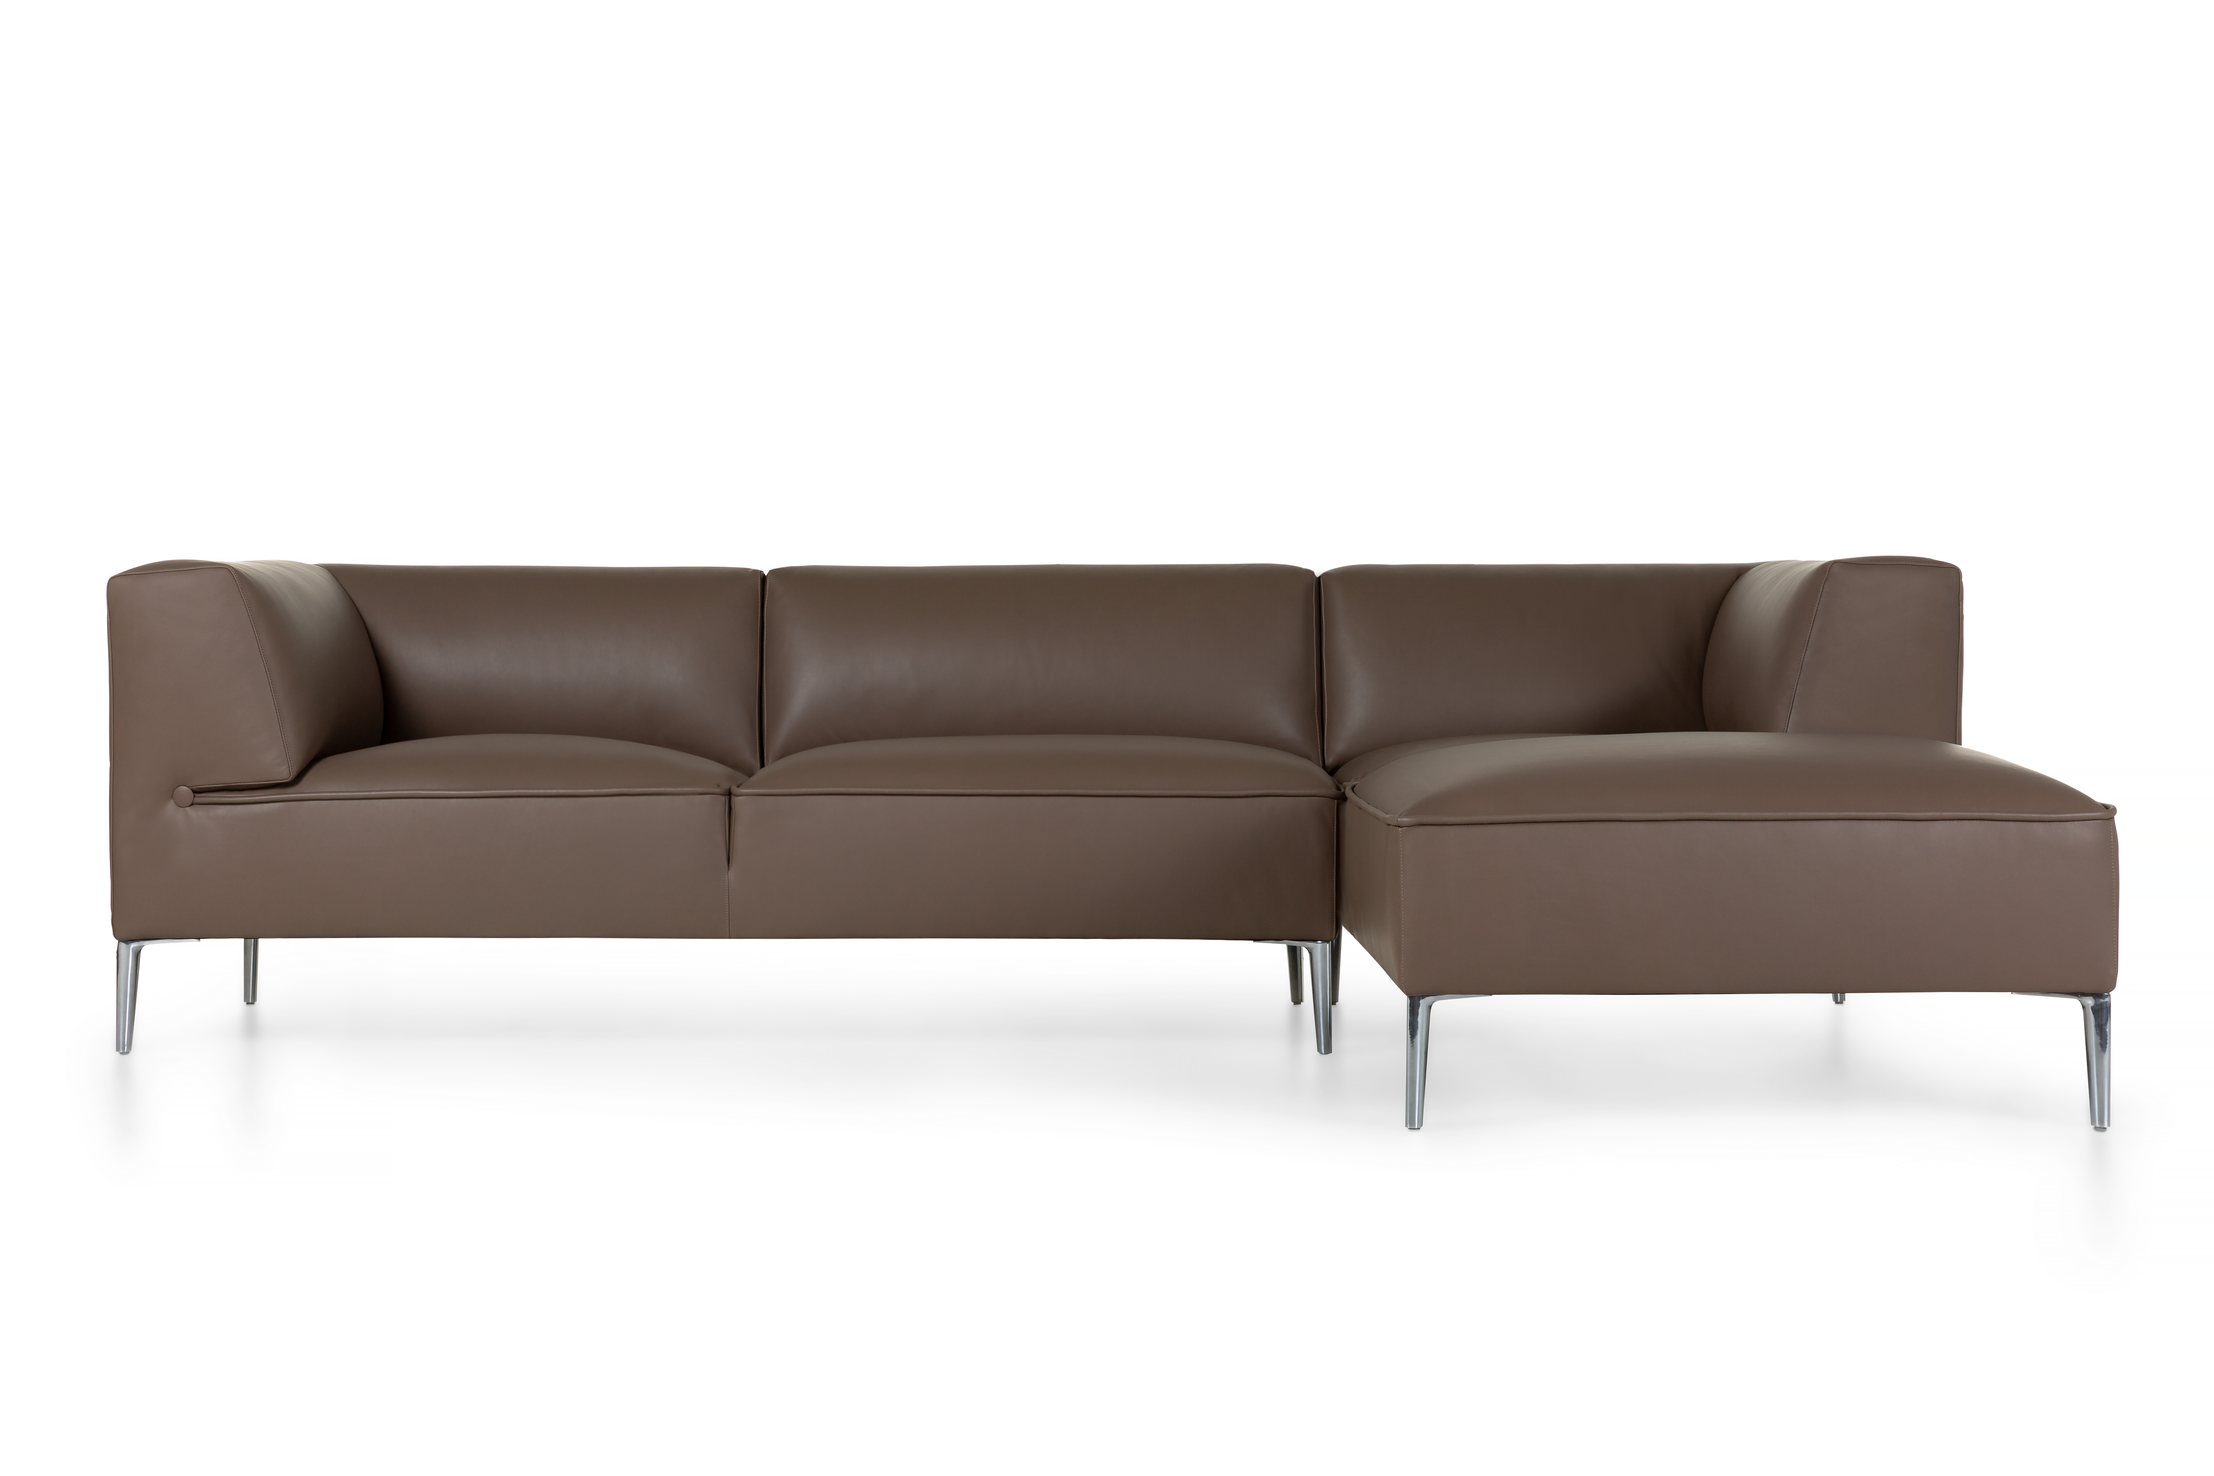 Leather Sofa vs Fabric Sofa: Which Is Better For Your Home?